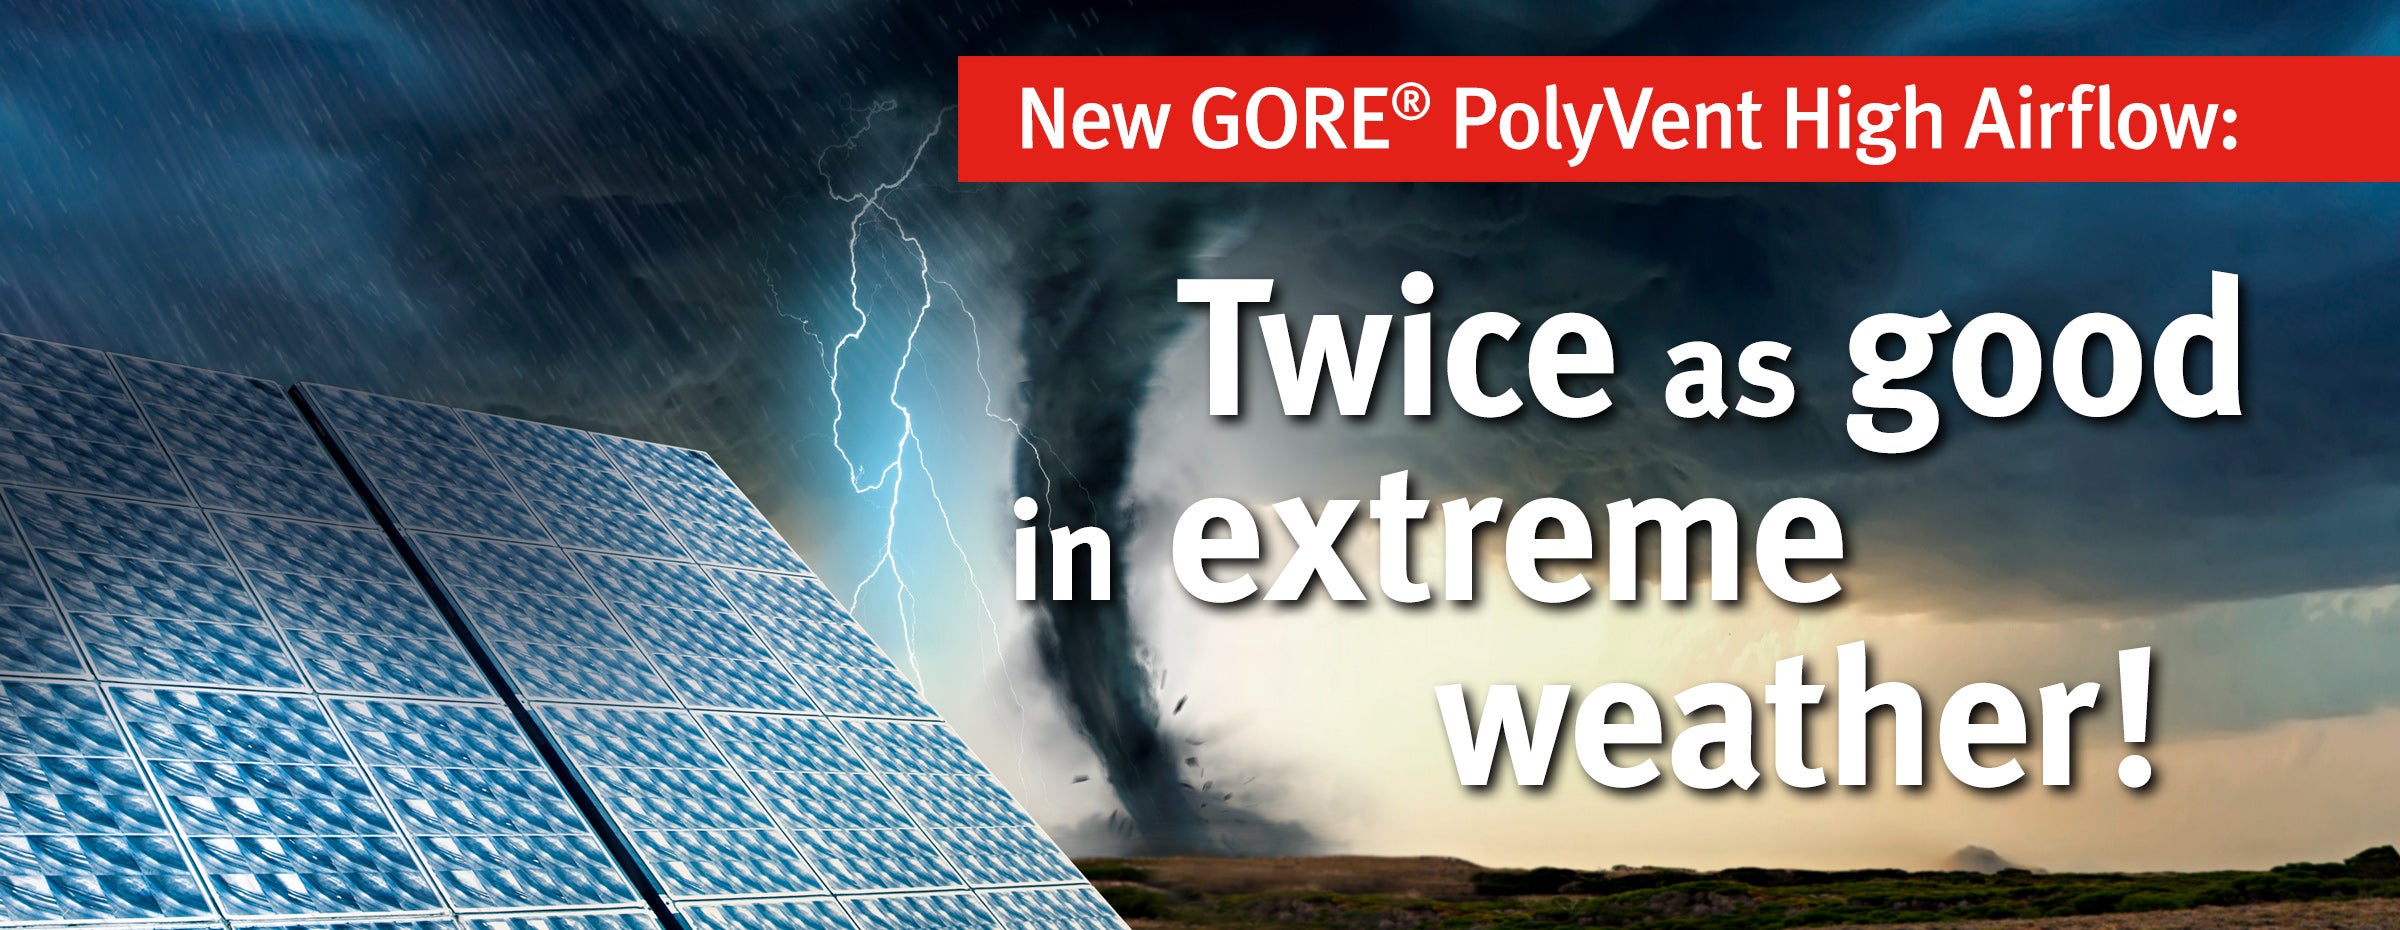 New PolyVent High Airflow Brings Next-Generation Performance to GORE Protective Vents Screw-In Series